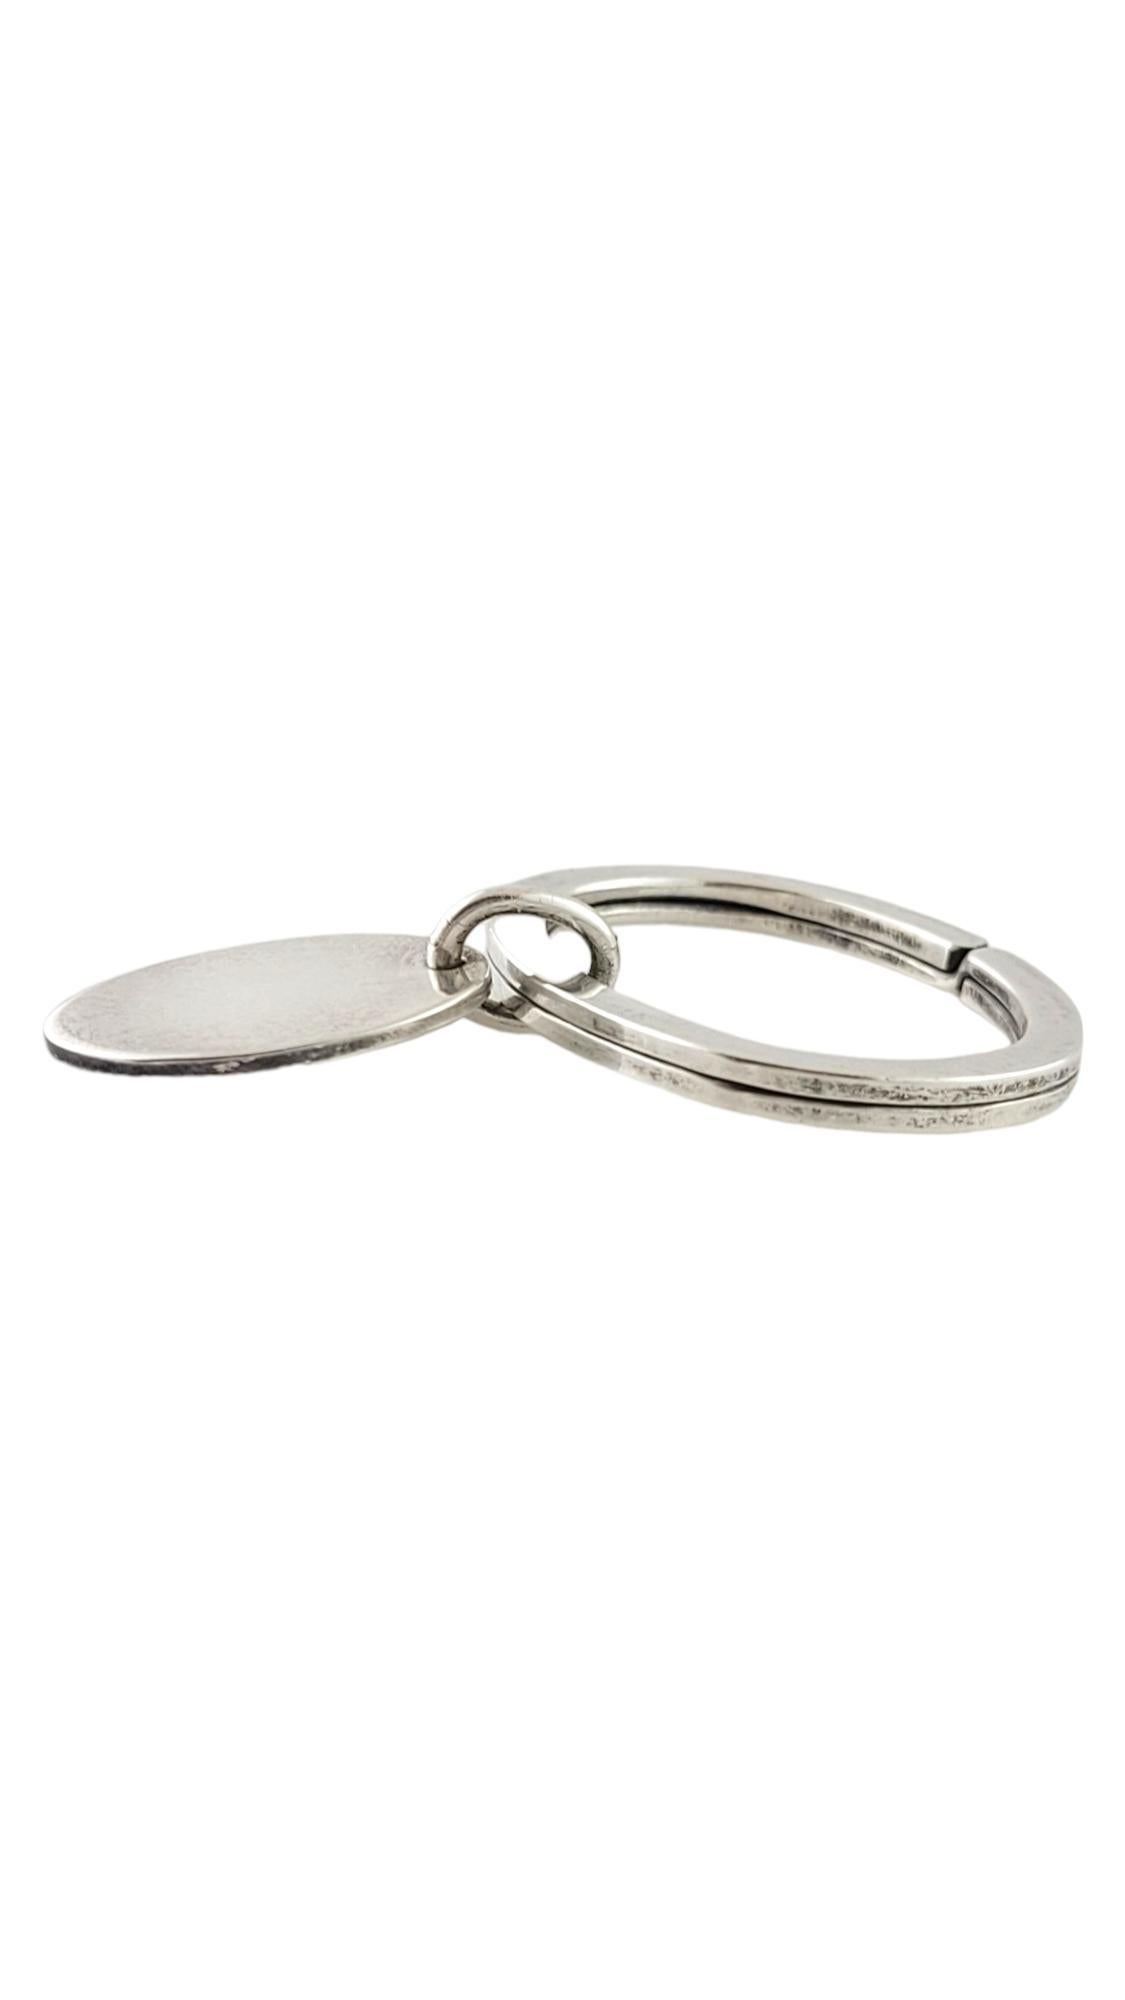 Women's Tiffany & Co 925 Sterling Silver Oval Key Ring with Tag #17410 For Sale